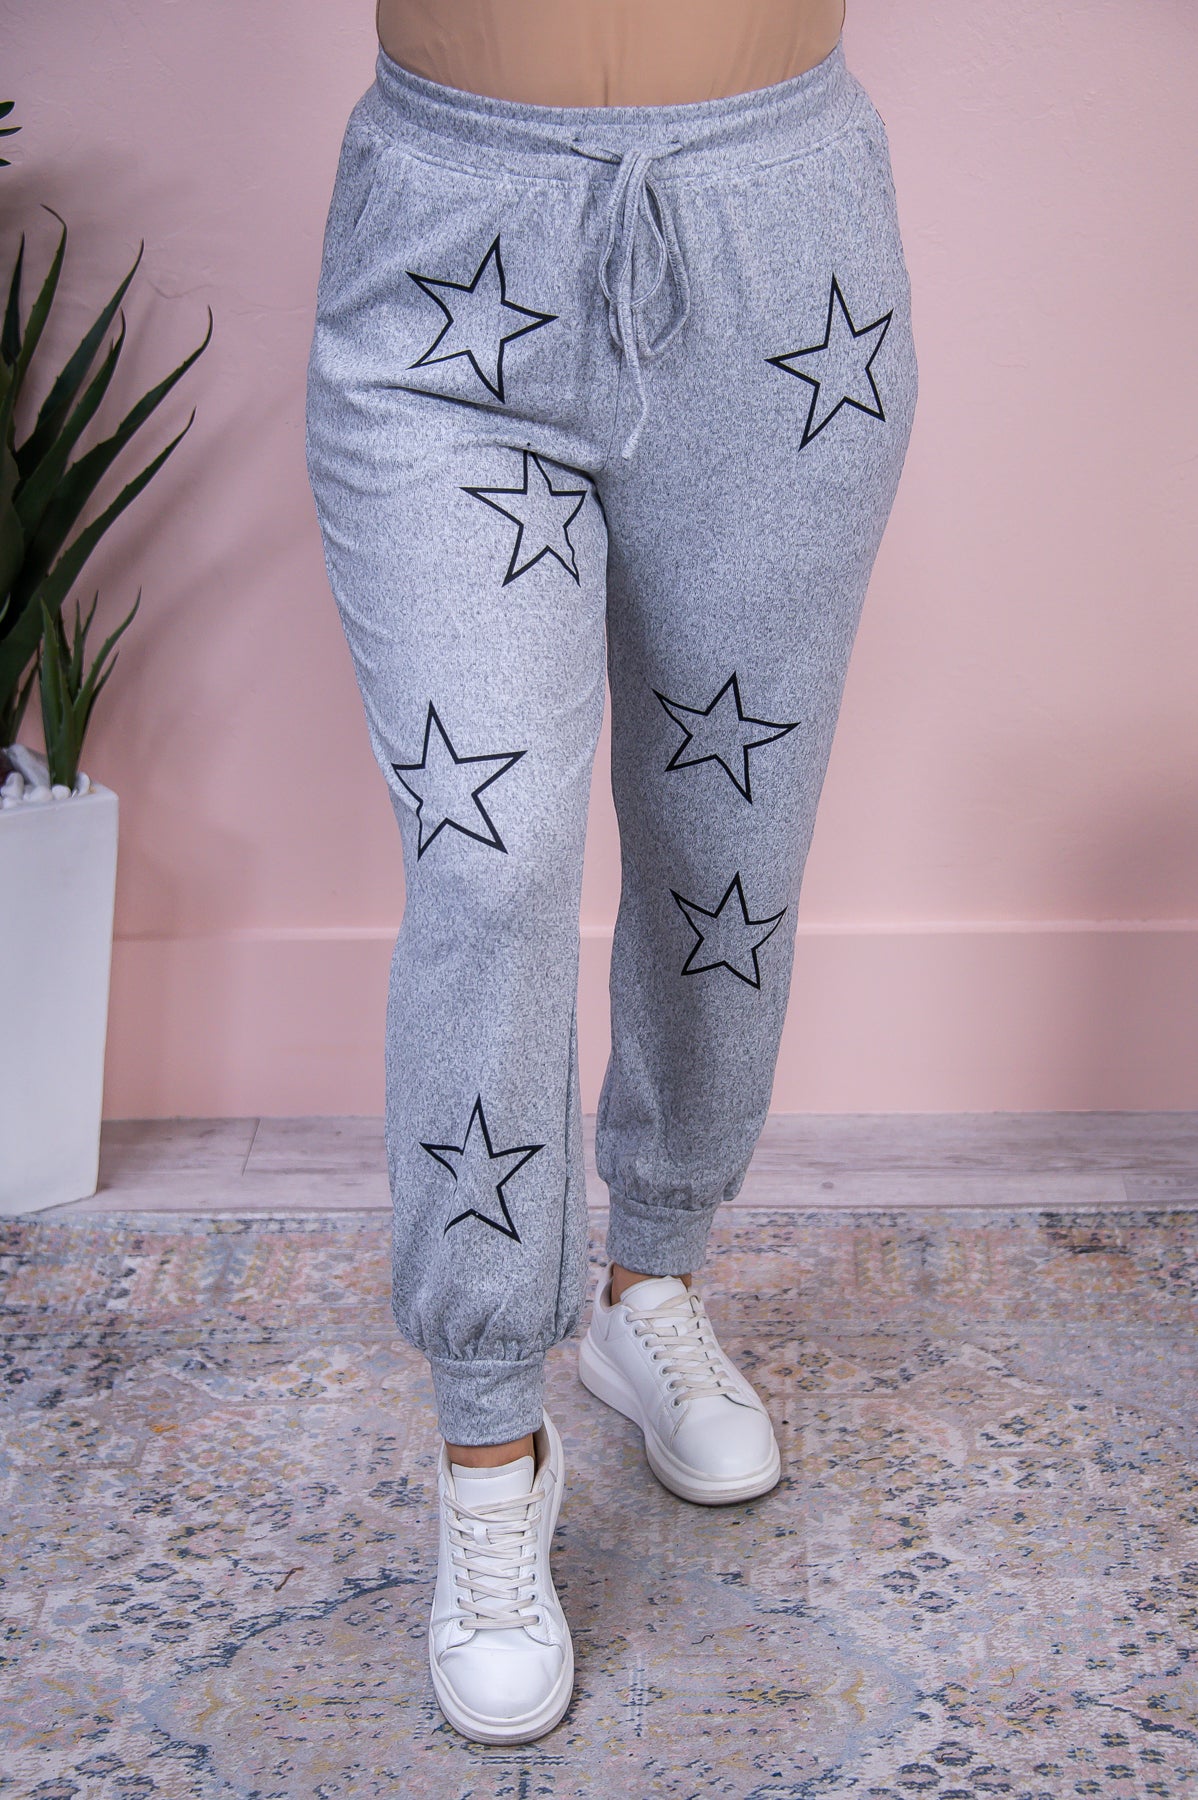 Dreaming Of Stars Heather Gray/Black Star Top/Jogger (2-Piece Set) - T8364HGR